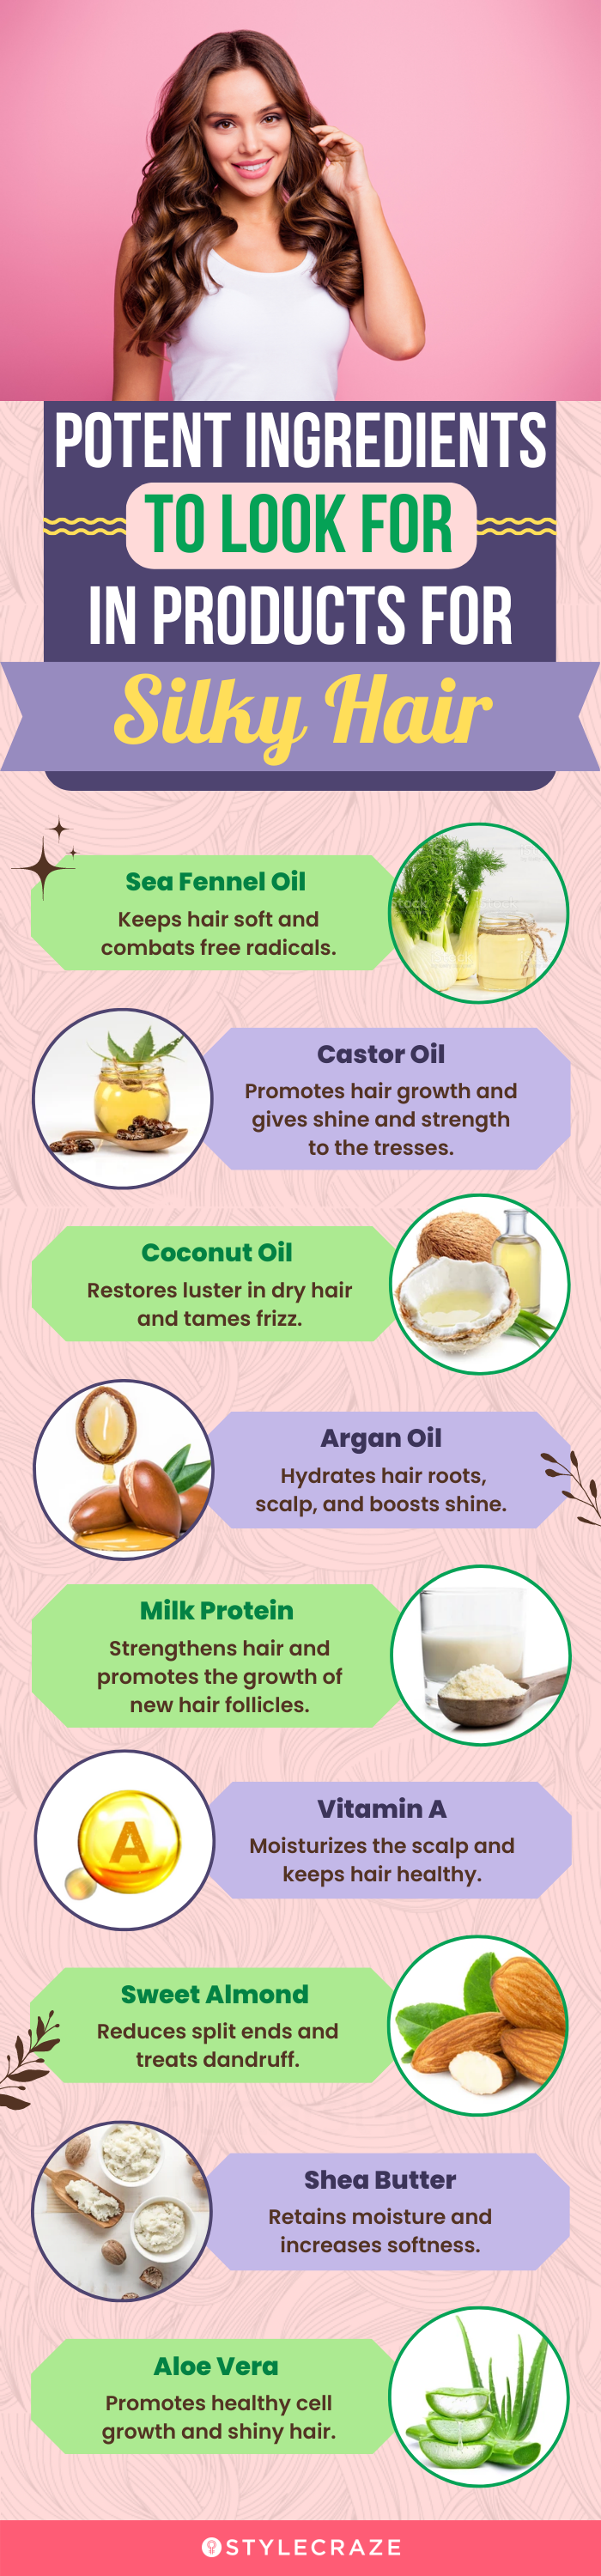 Ingredients To Look For In Products For Silky Hair (infographic)